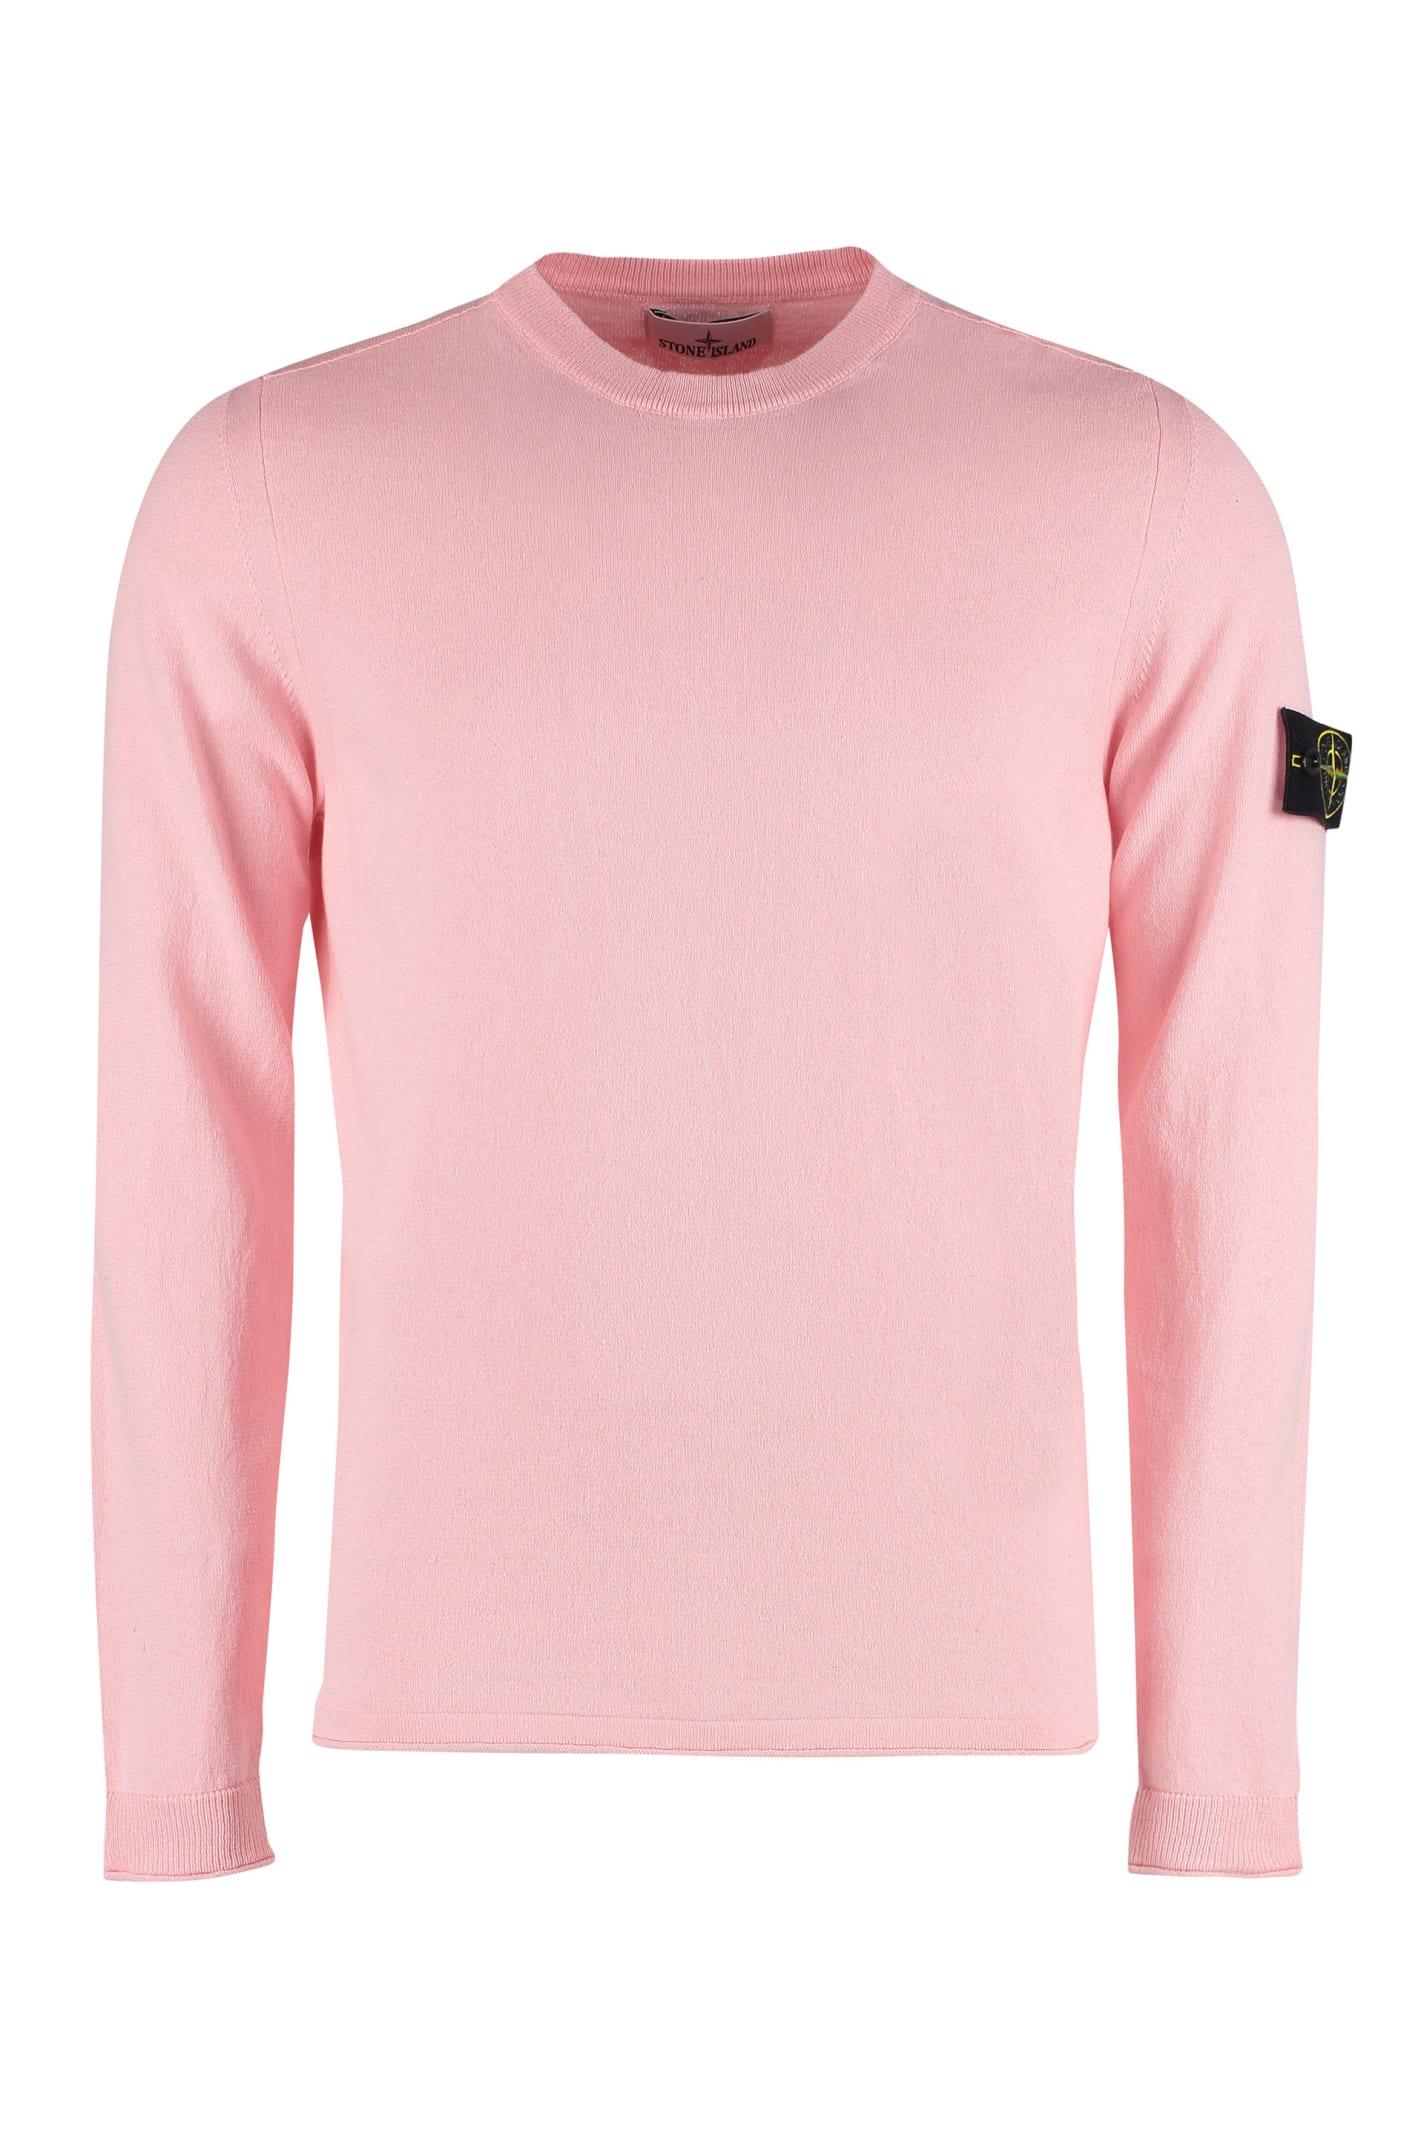 Stone Island Cotton Crew-neck Sweater in Pink for Men | Lyst